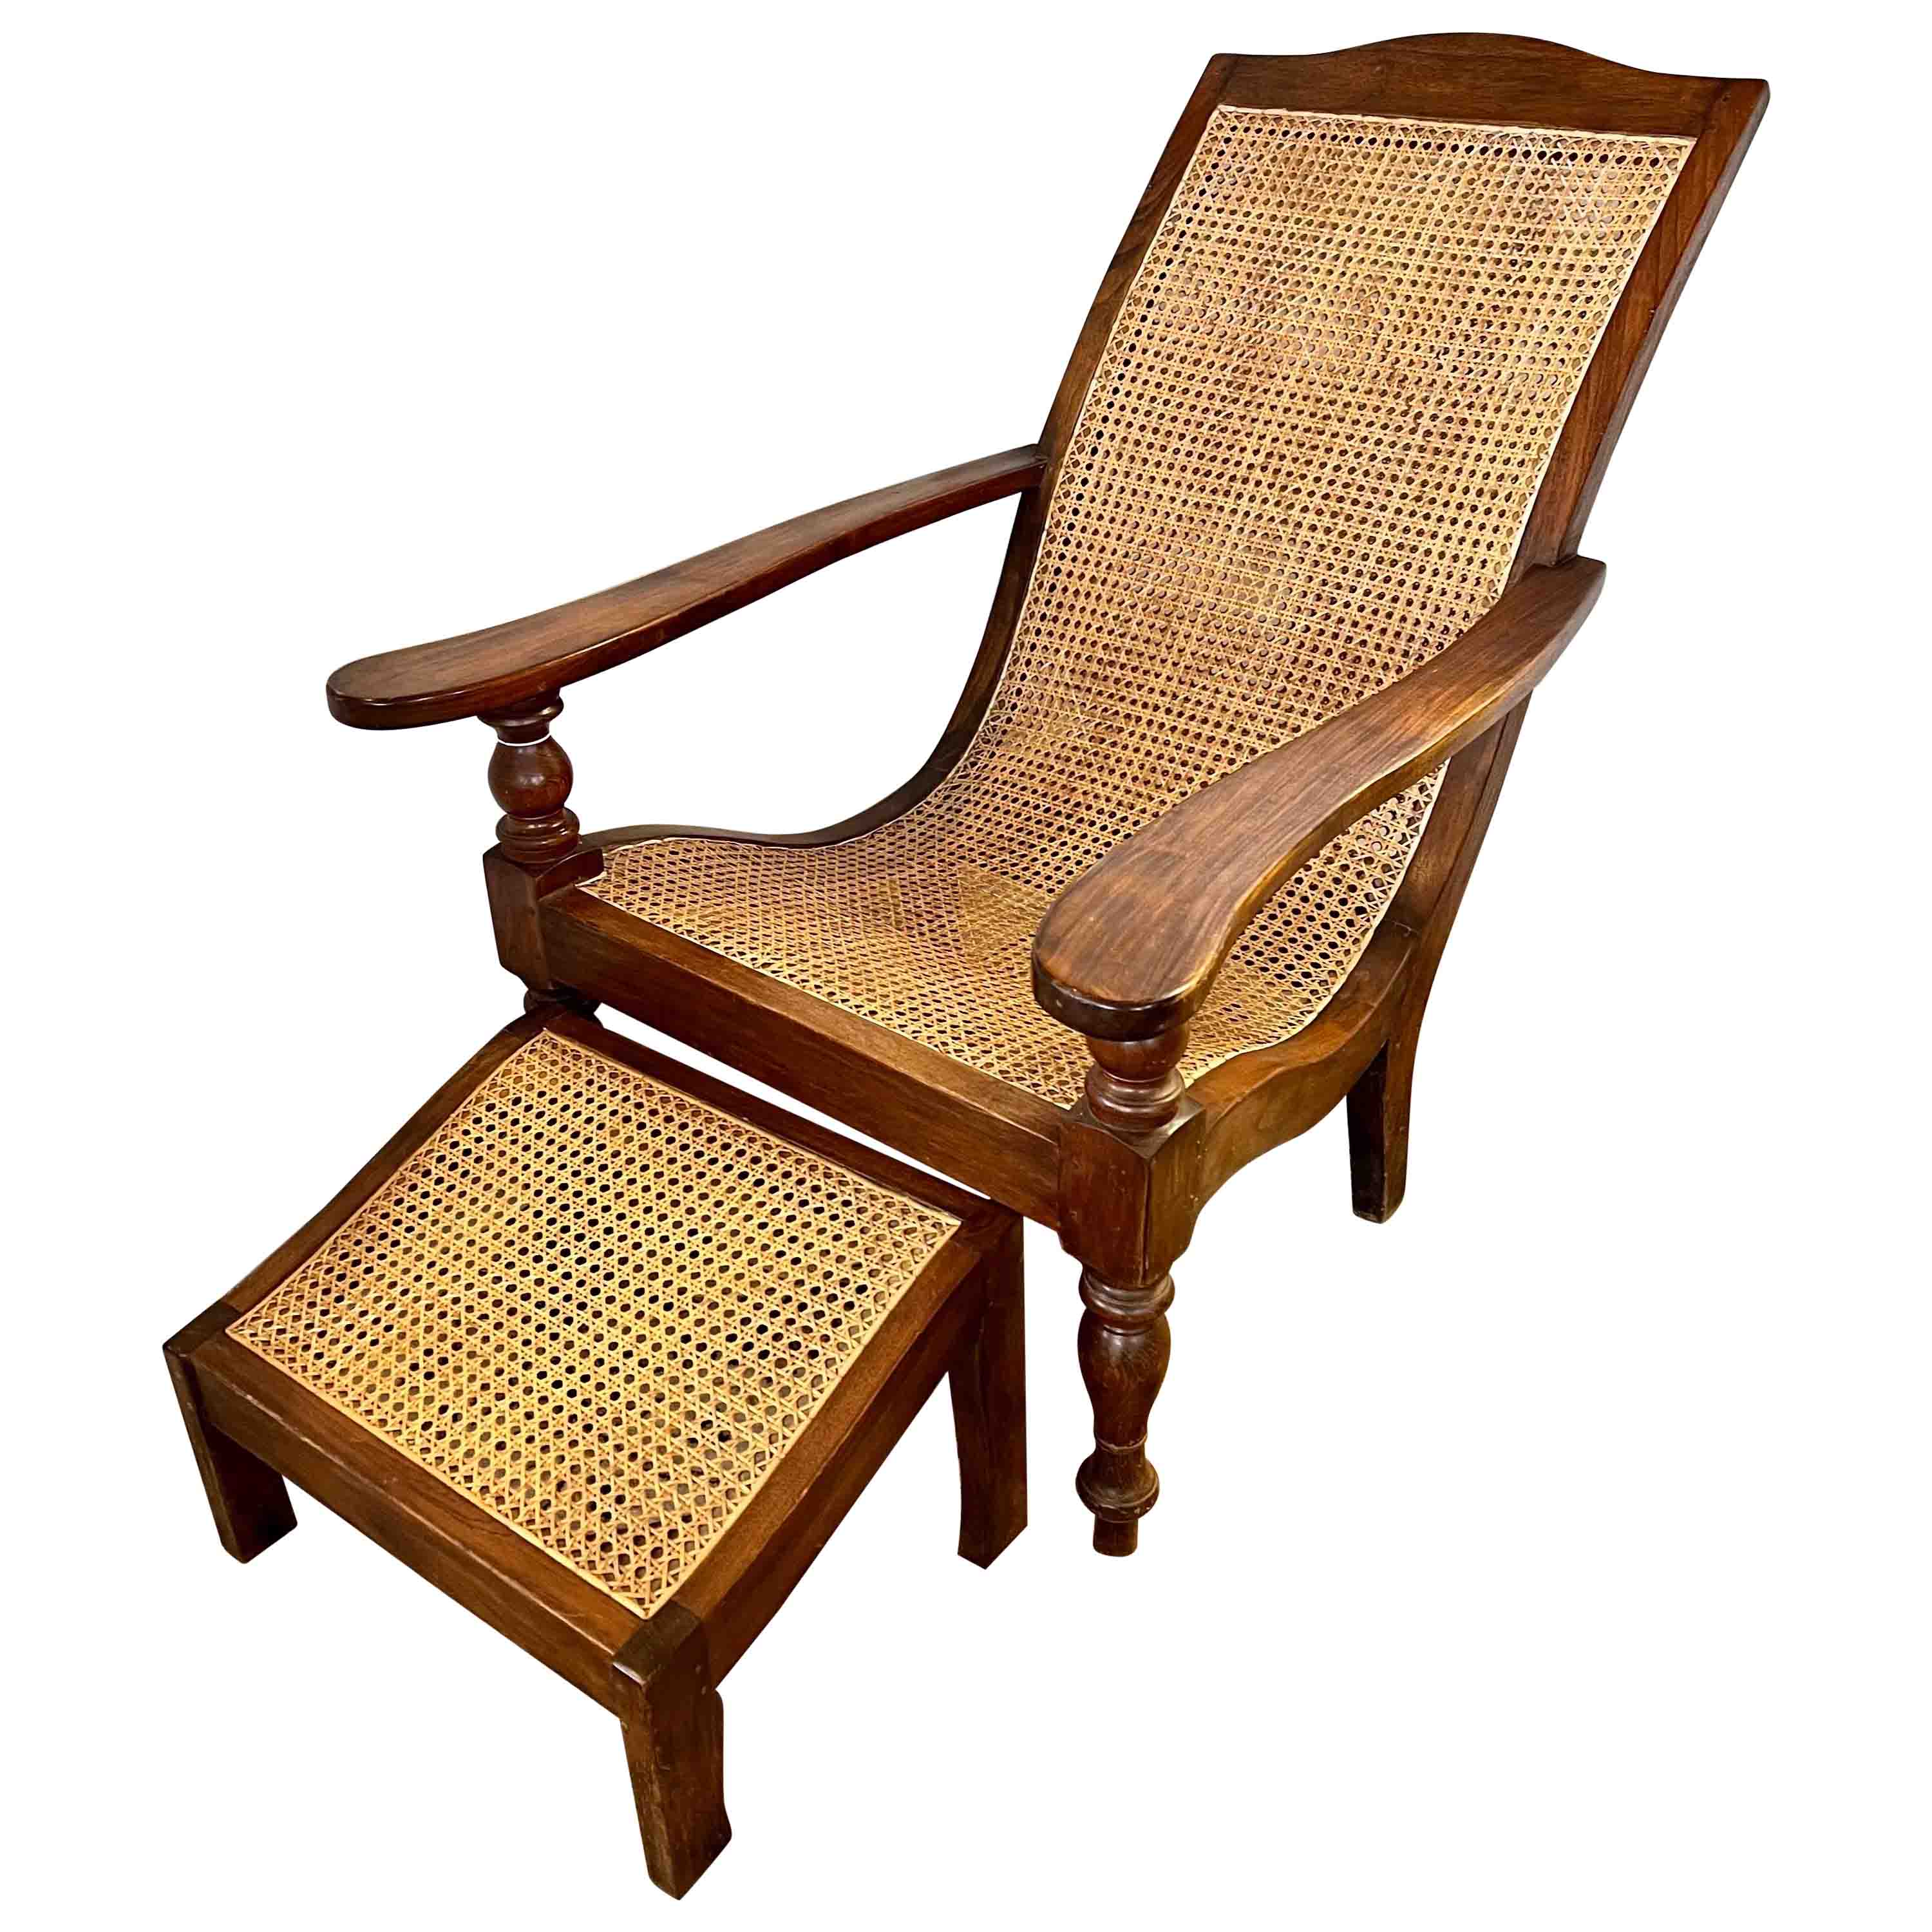 British Colonial Cane Plantation Chair and Matching Ottoman